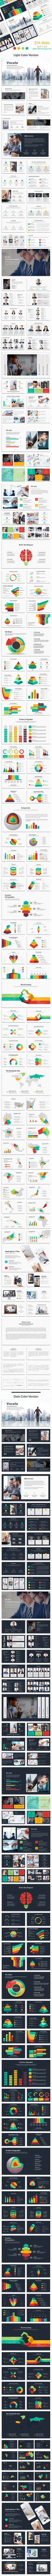 Vocolo Business PowerPoint Template